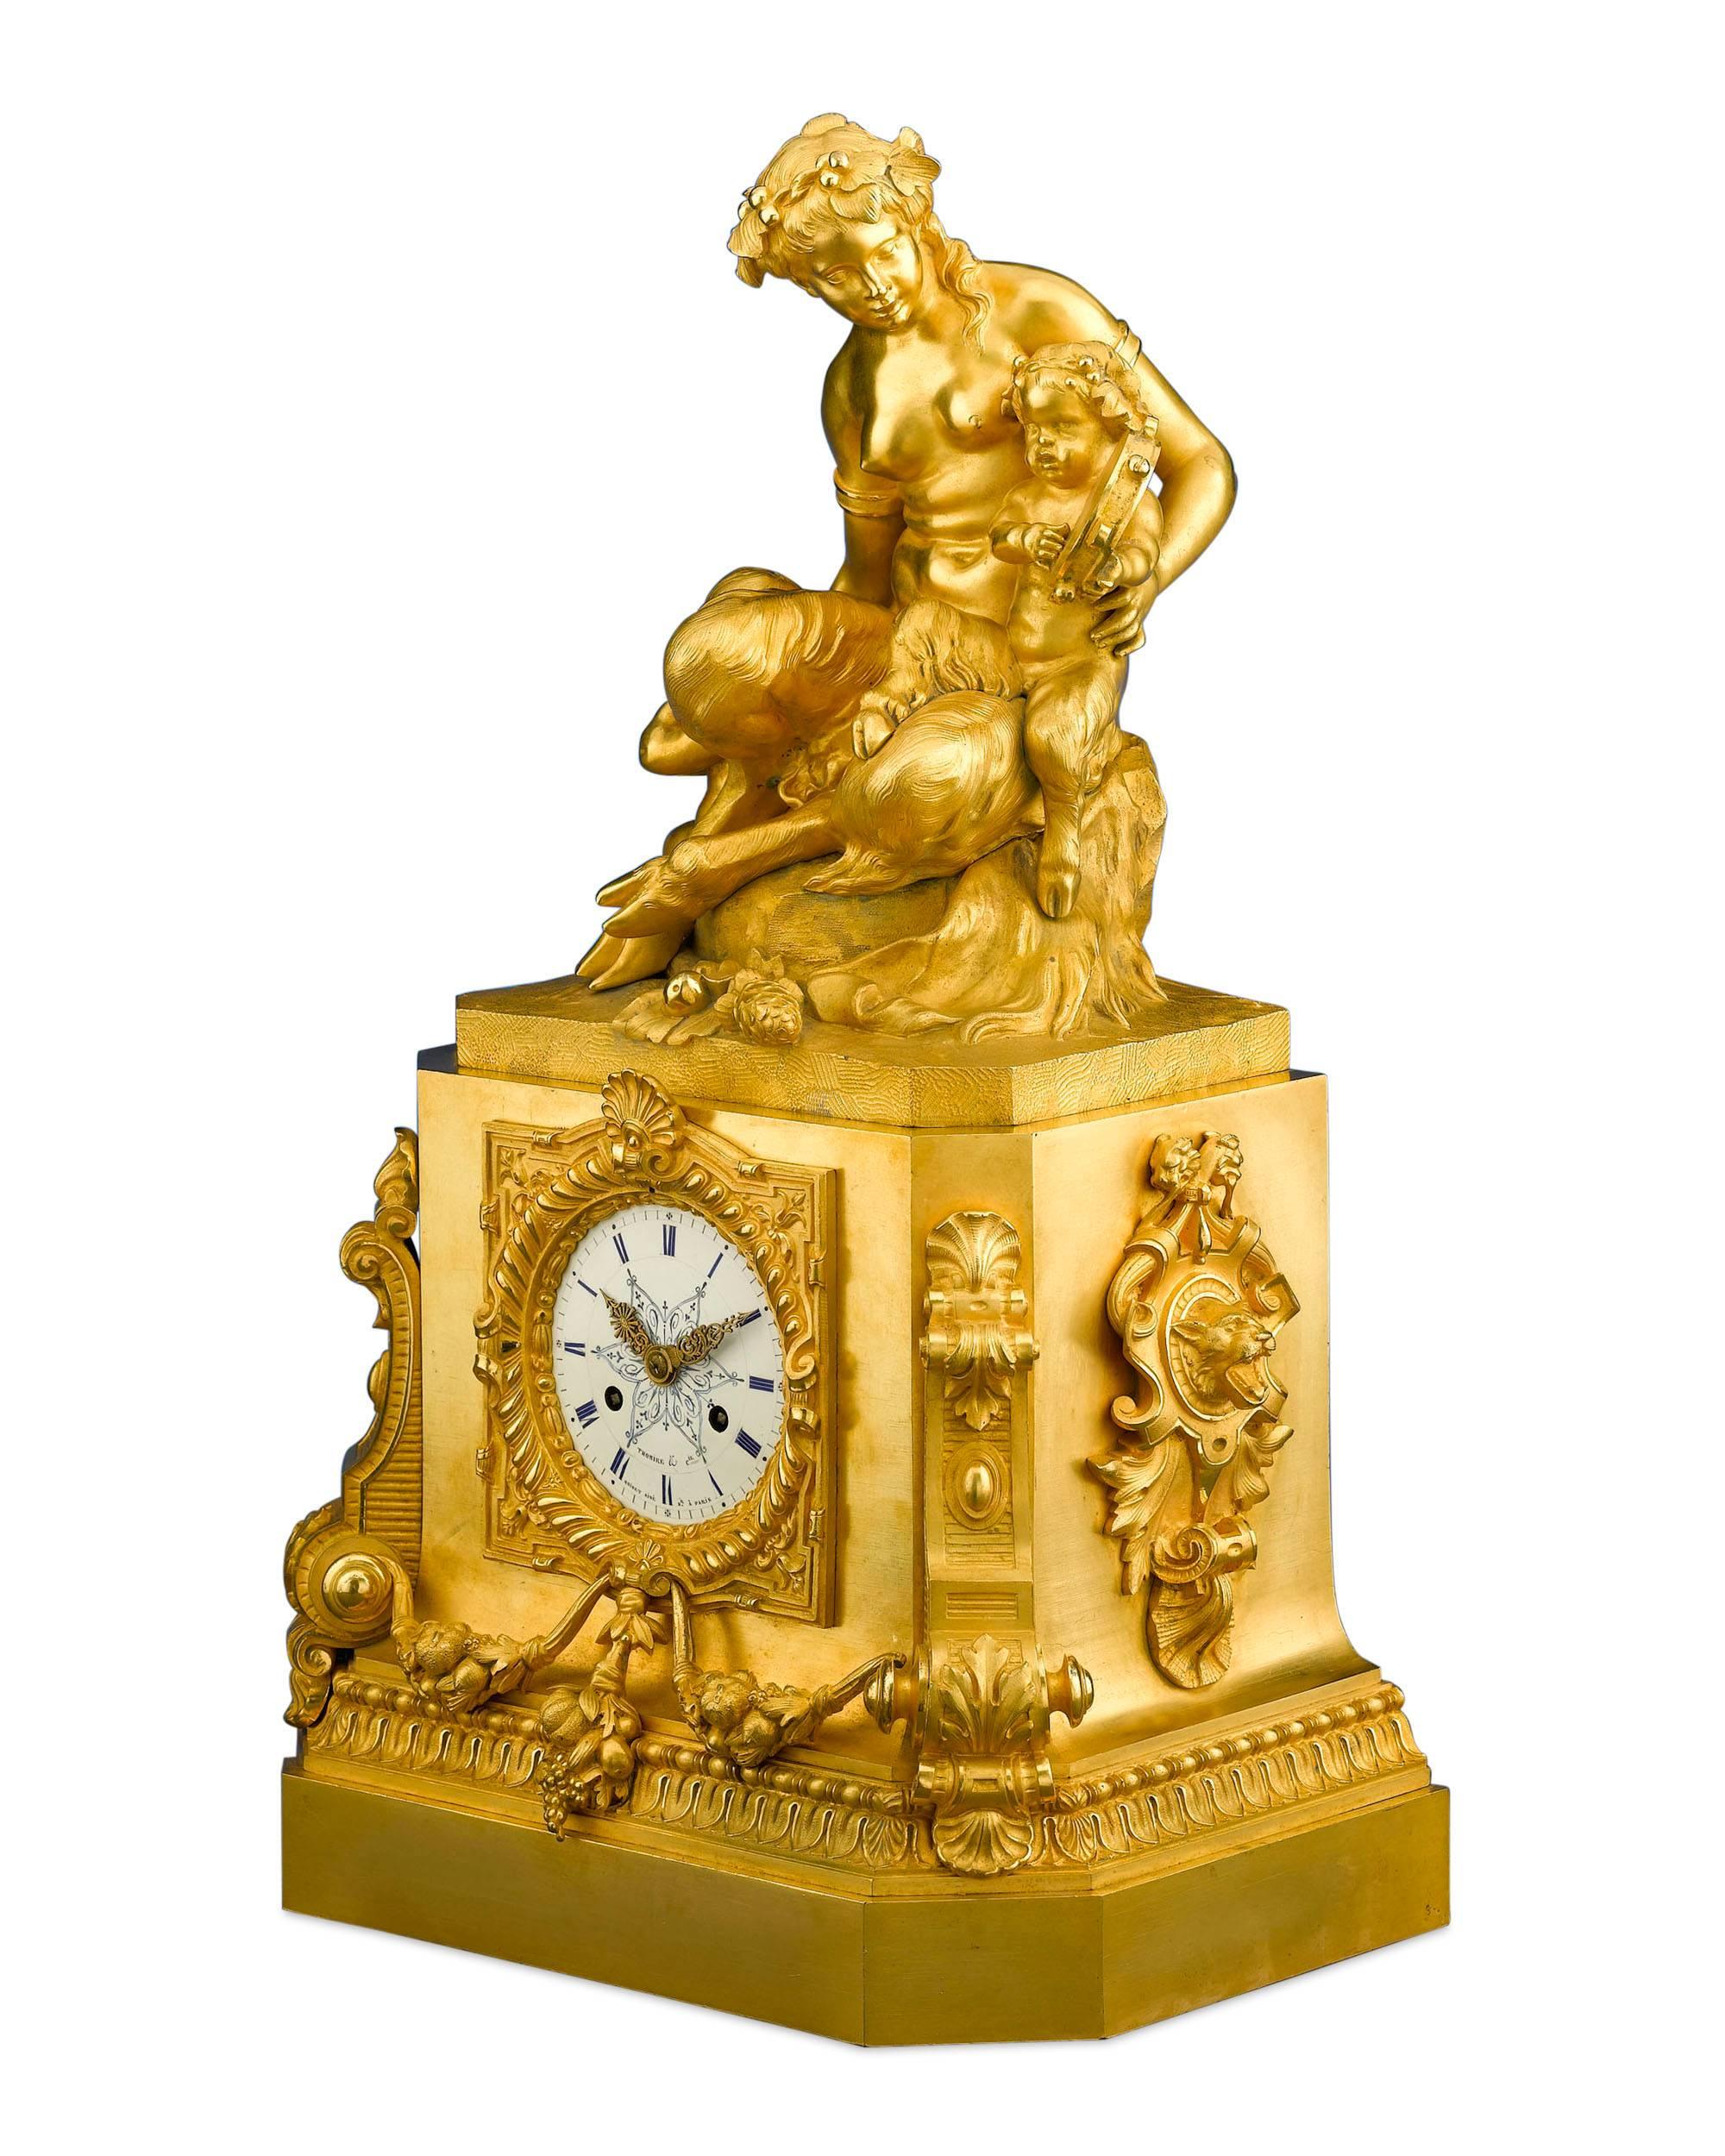 A female satyr enjoys music played by two young fauns in this remarkable gilt bronze mantel clock by bronzier Thomire & Cie and clockmaker Louis Moinet. The body, crafted by Pierre-Philippe Thomire, is a celebration of classical forms, with its